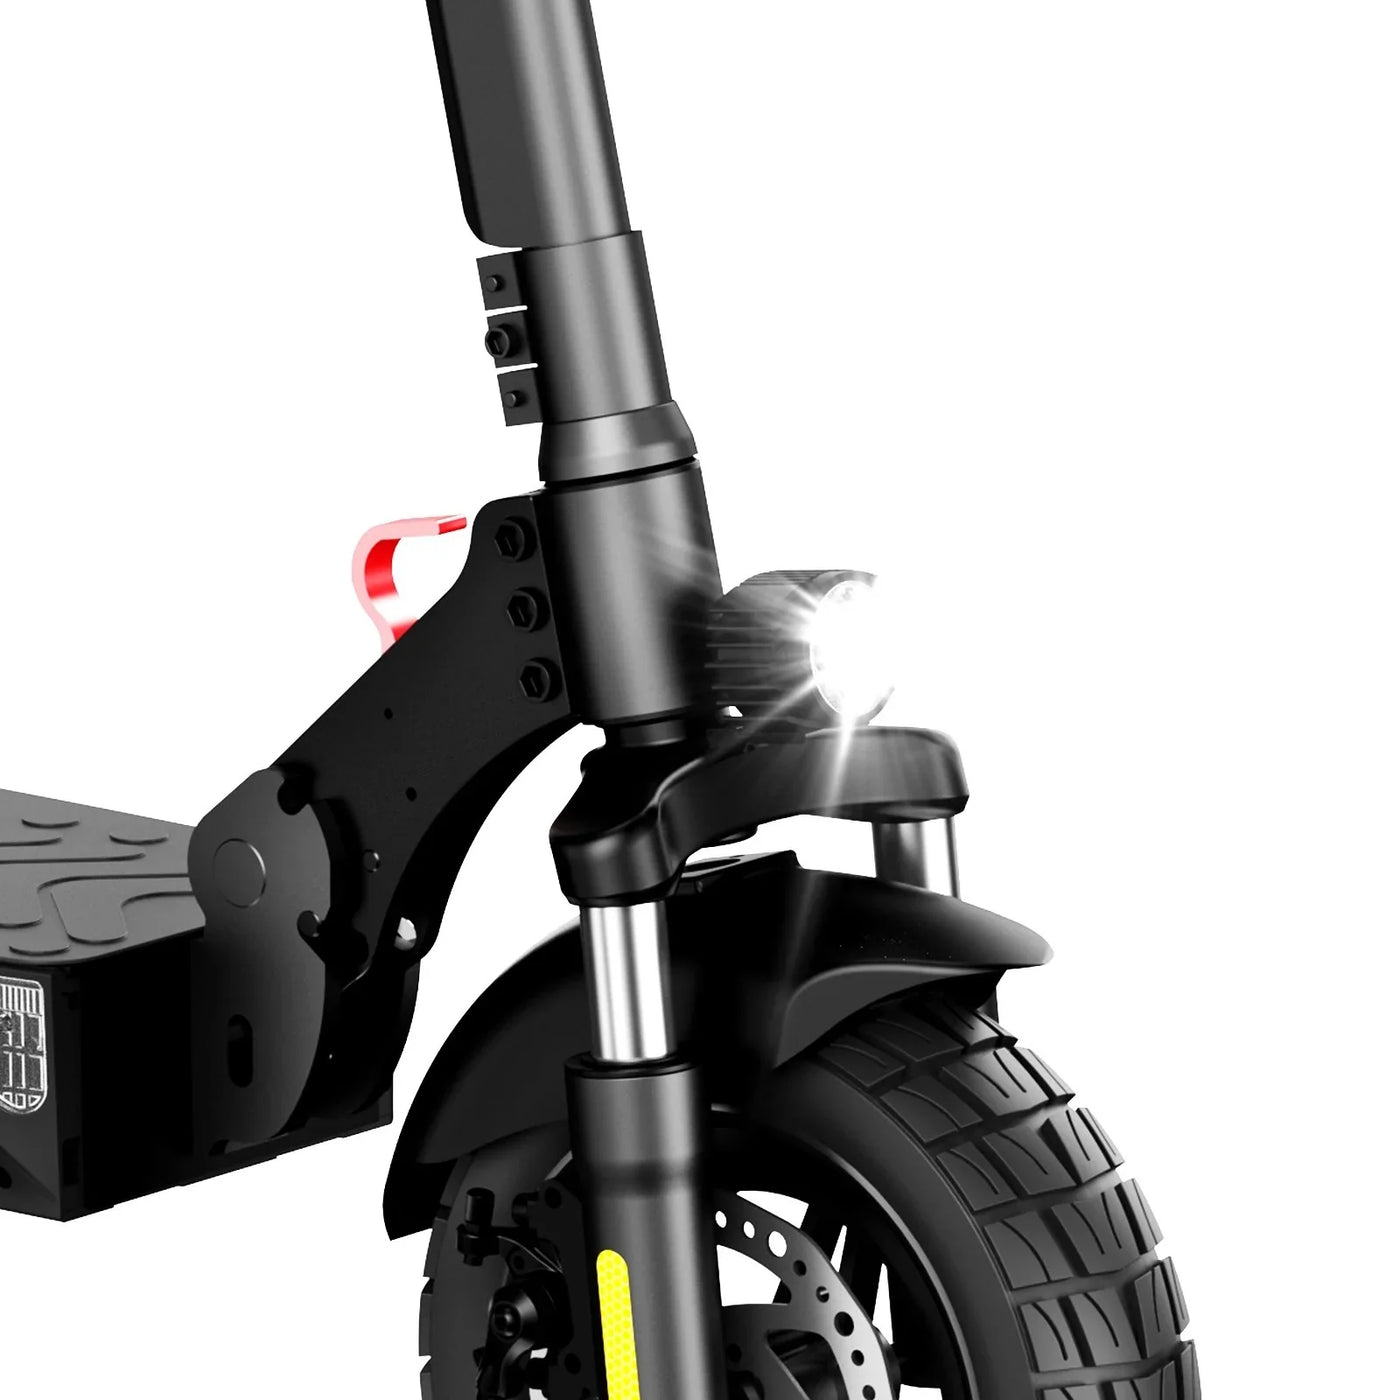 isinwheel M2 Off Road Electric Scooter 800W Weekly Deal